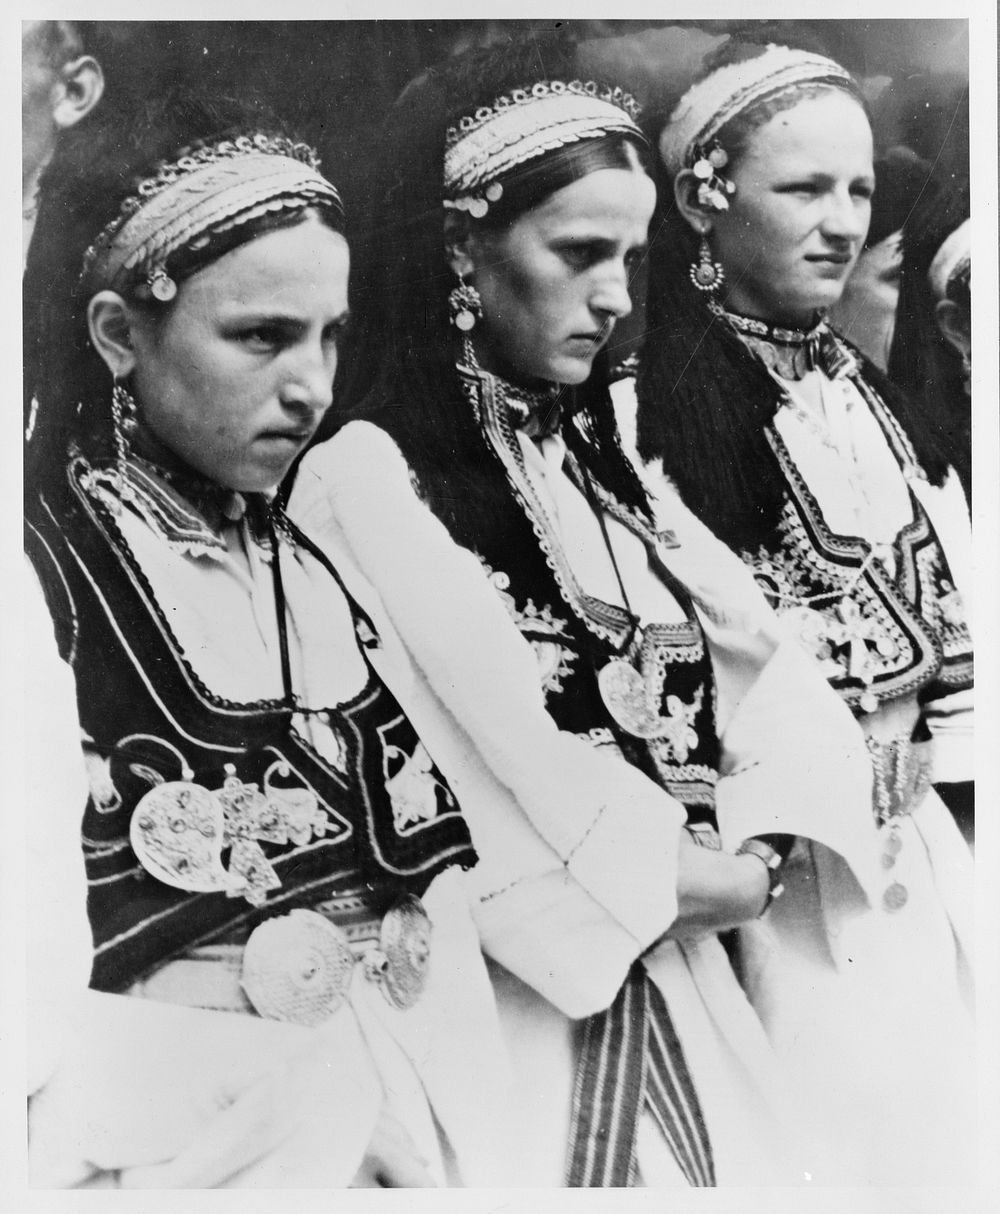 [Three girls in national costumes from Croatia]. Sourced from the Library of Congress.